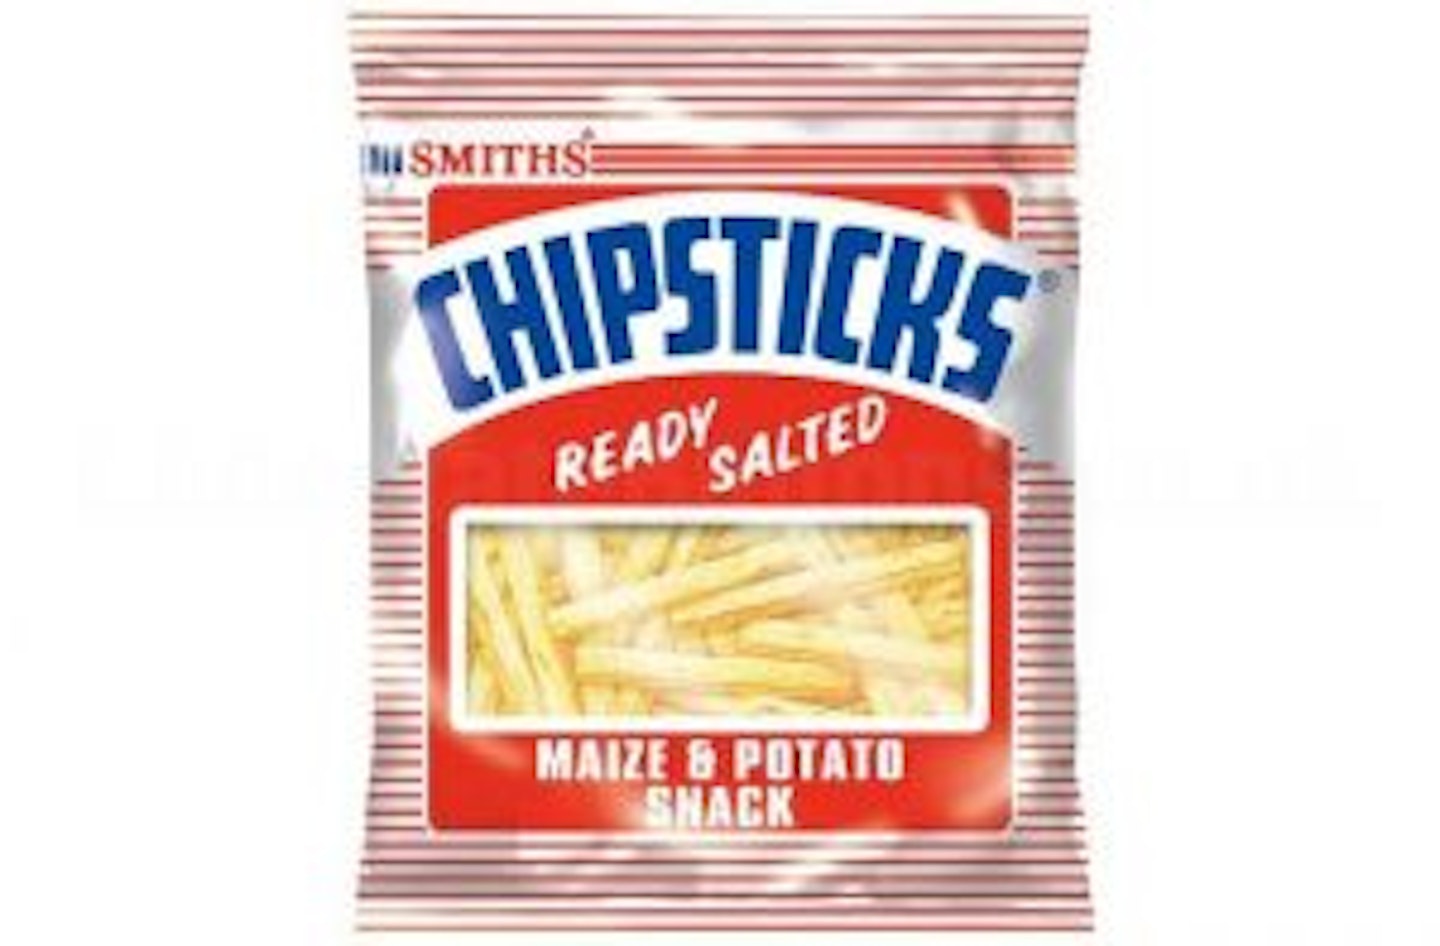 Discontinued crisps Ready Salted Chipsticks